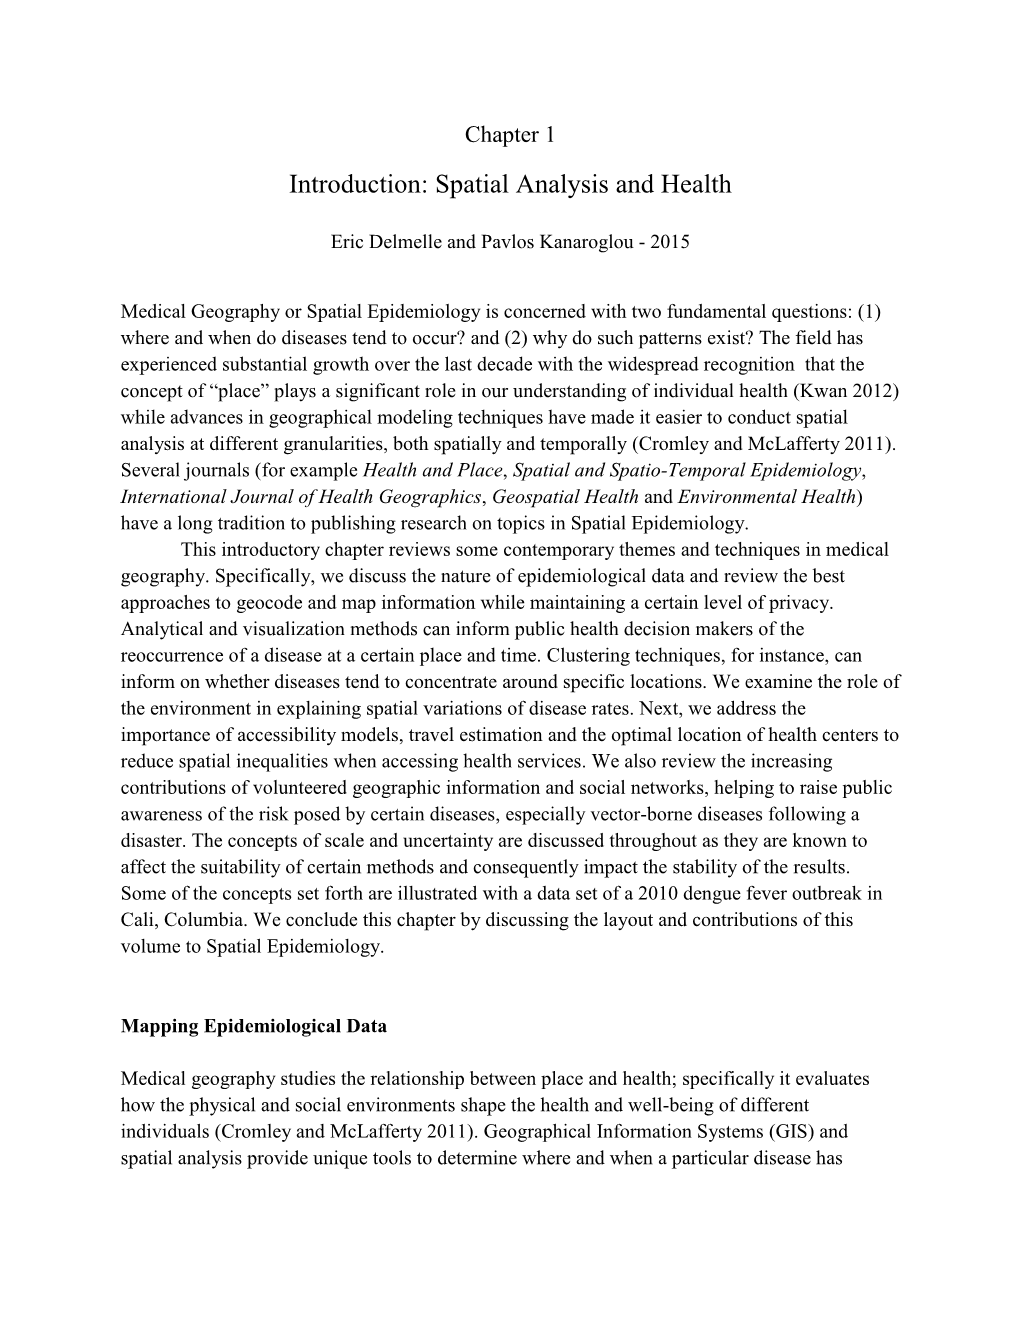 Introduction: Spatial Analysis and Health